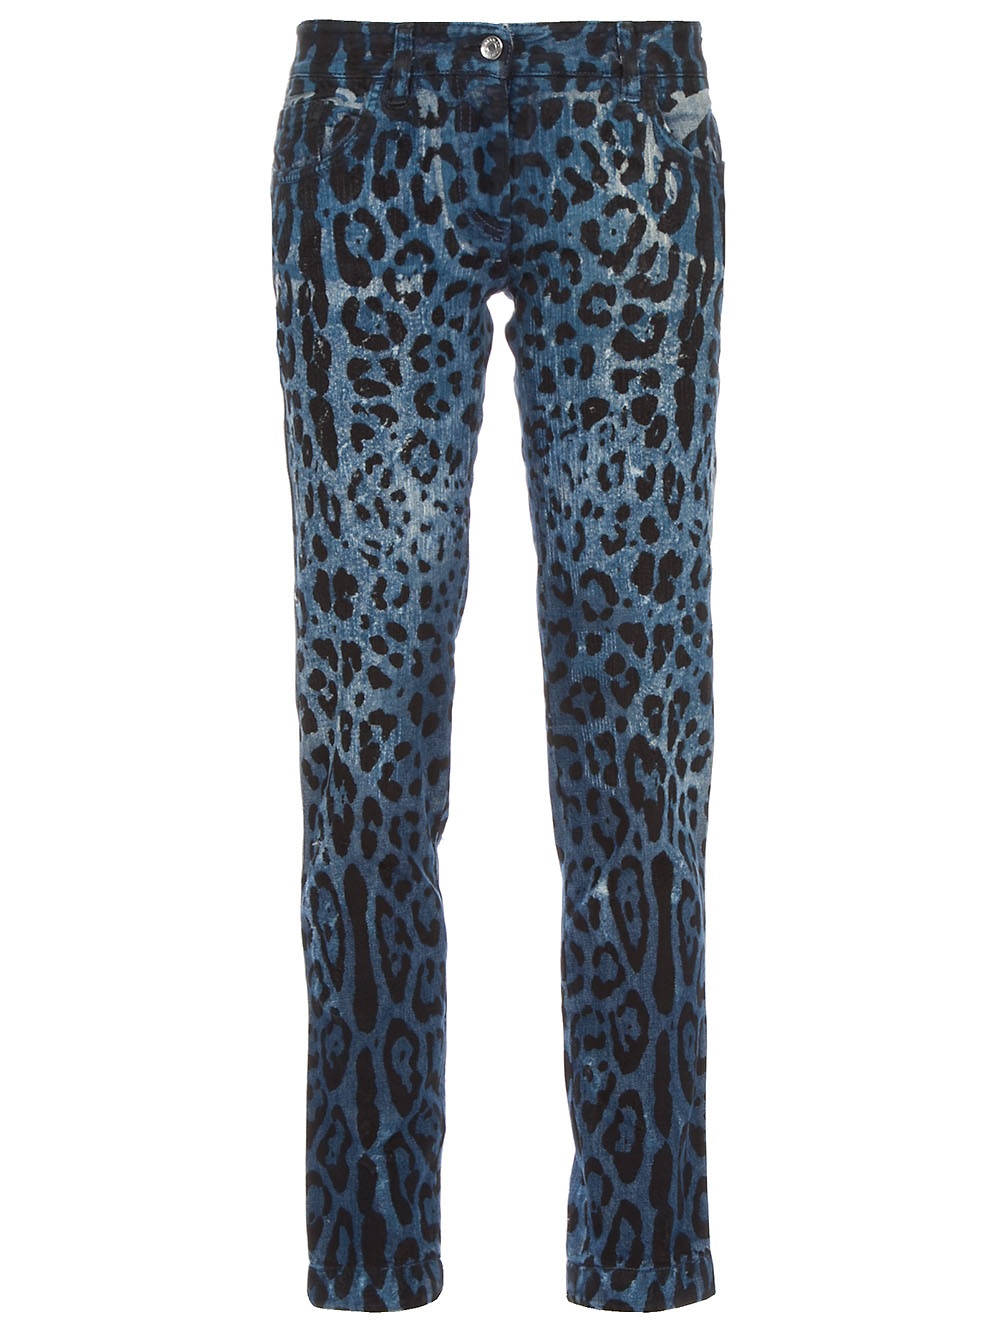 blue jeans with leopard print